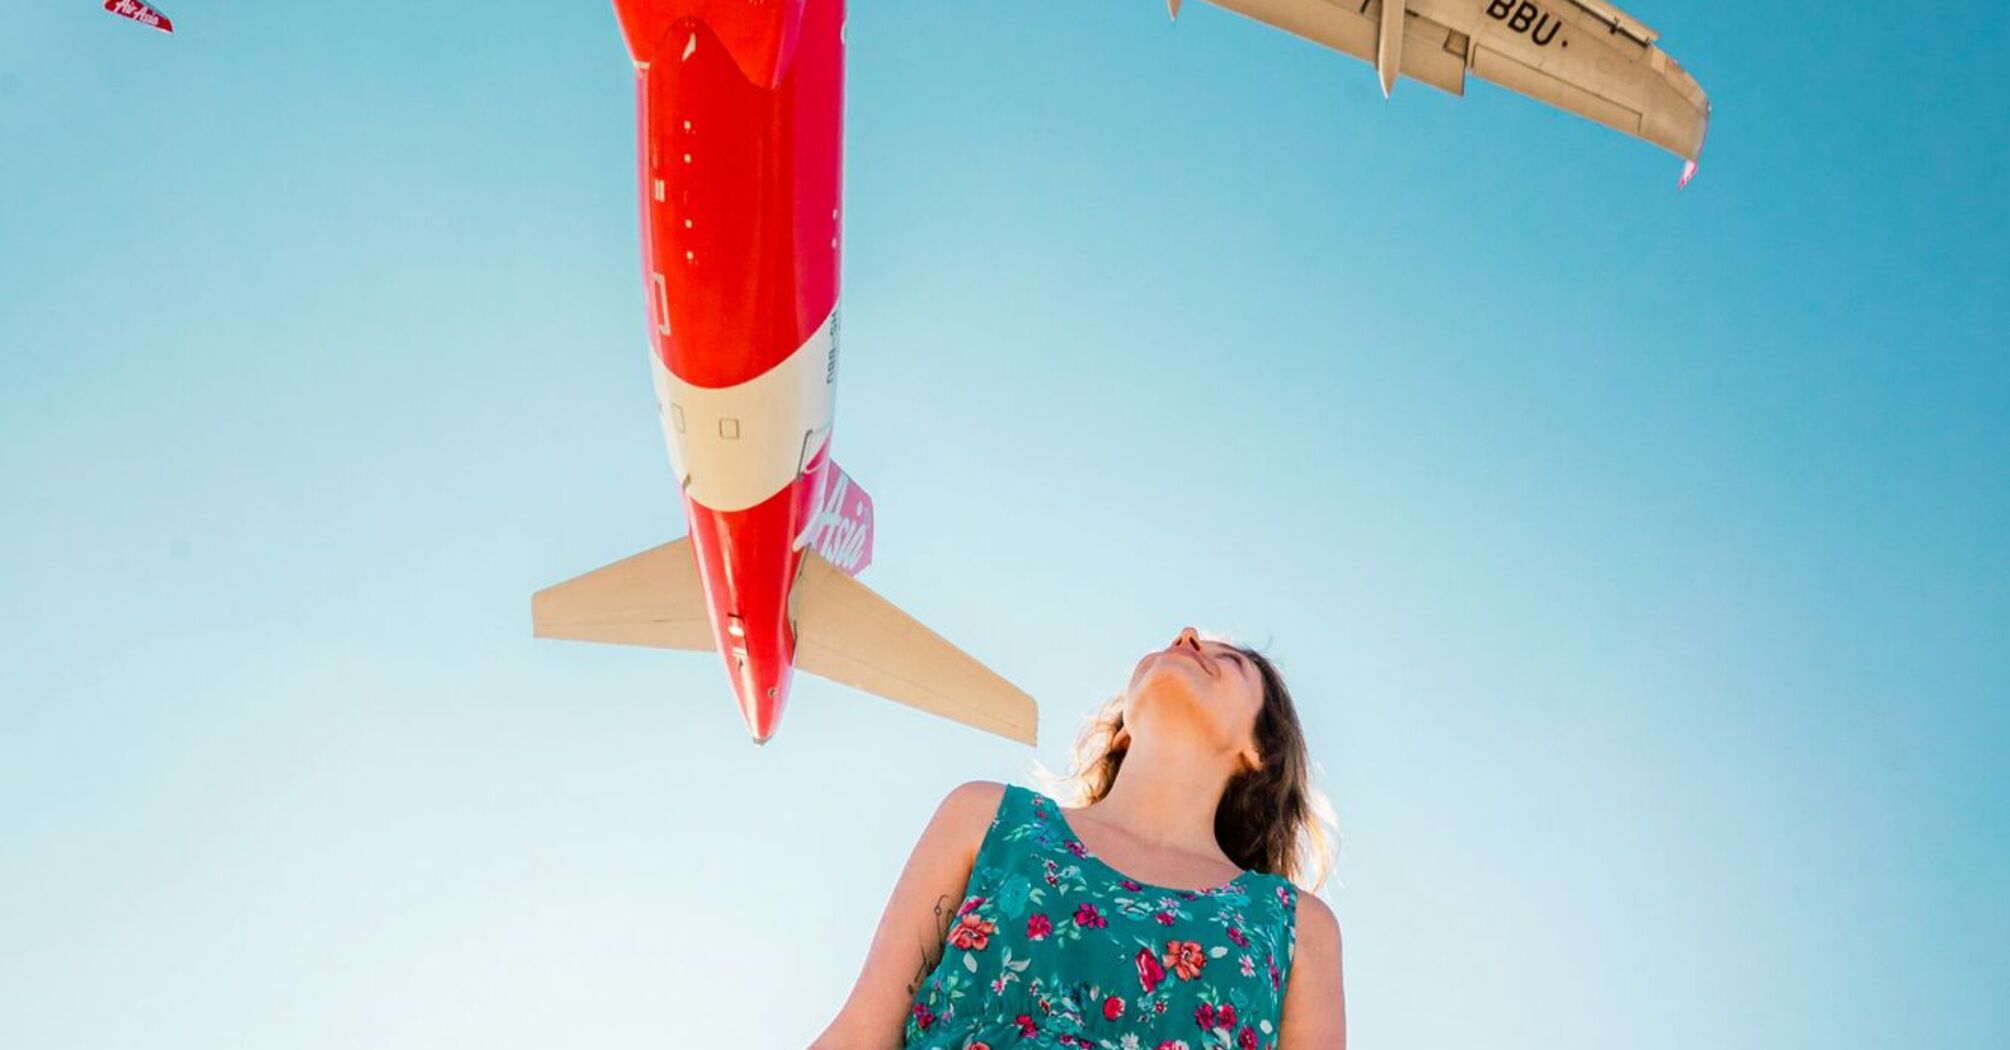 A person in a floral dress stands beneath an AirAsia plane flying overhead against a clear blue sky